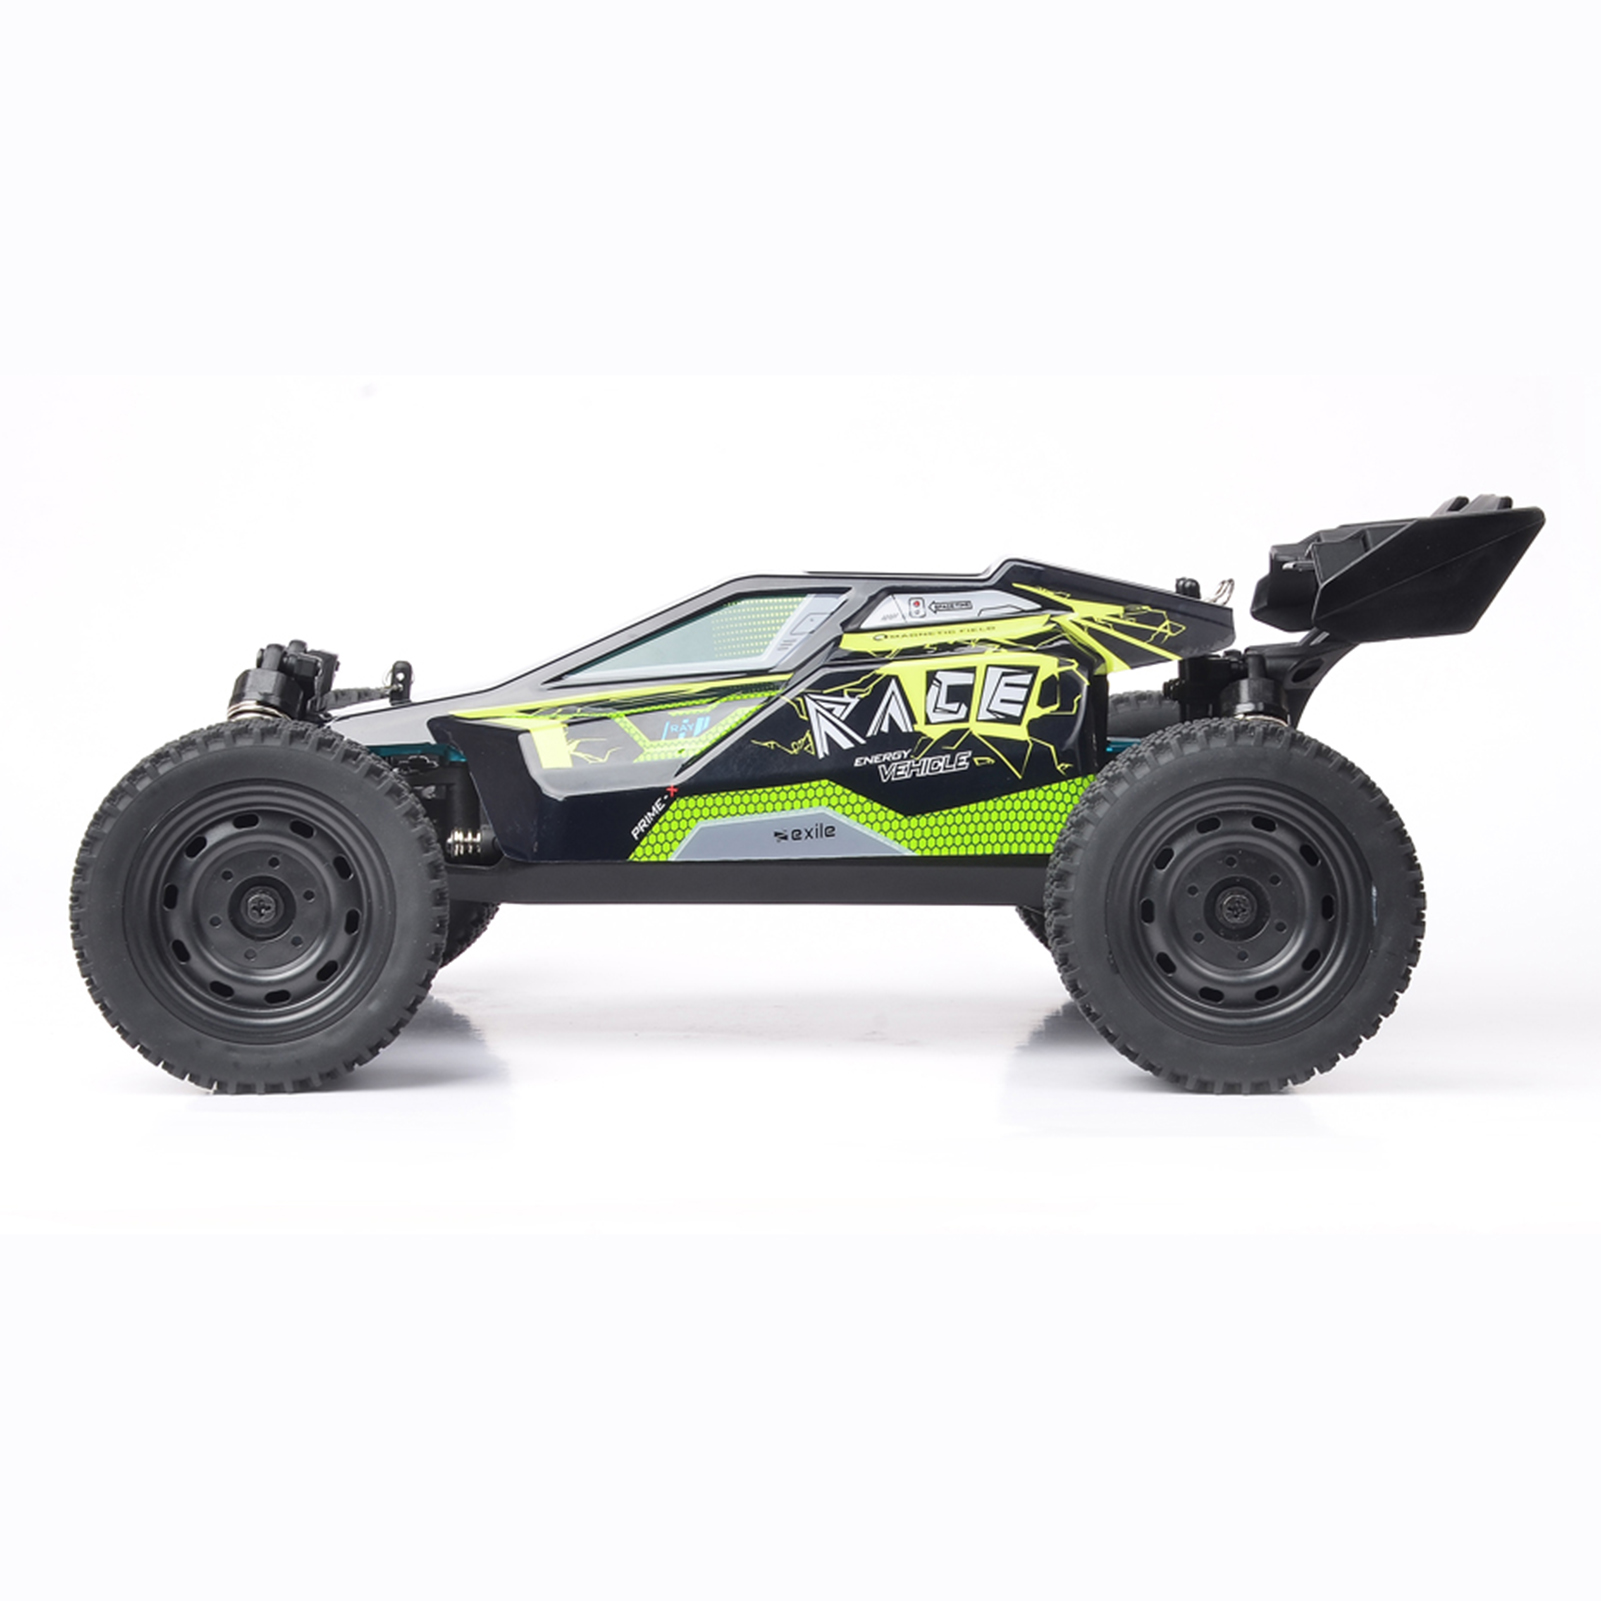 Off-Road Car  Truck  Car High Speed 35kmh 116 2.4GHz Racing Car 4WD  for Boys with 2 Battery - image 4 of 7